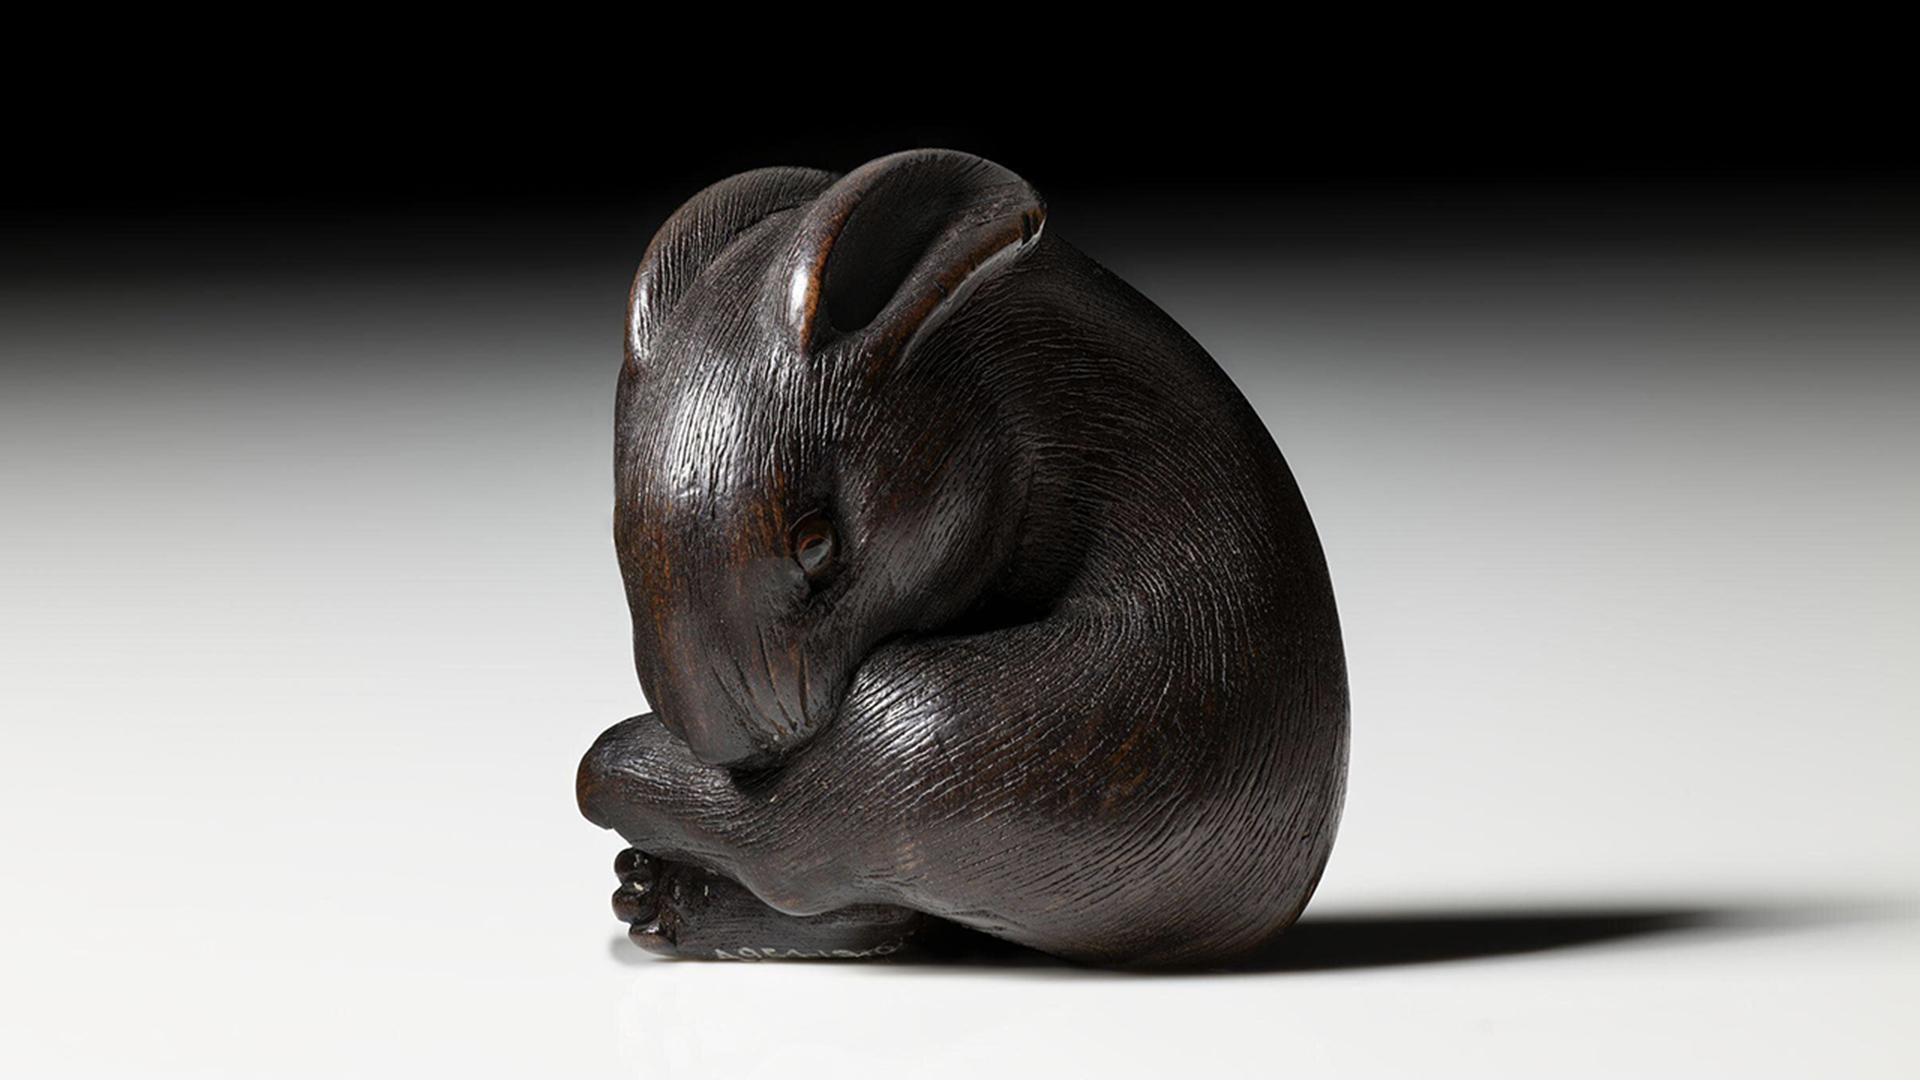 Miniature wooden carving of a mouse